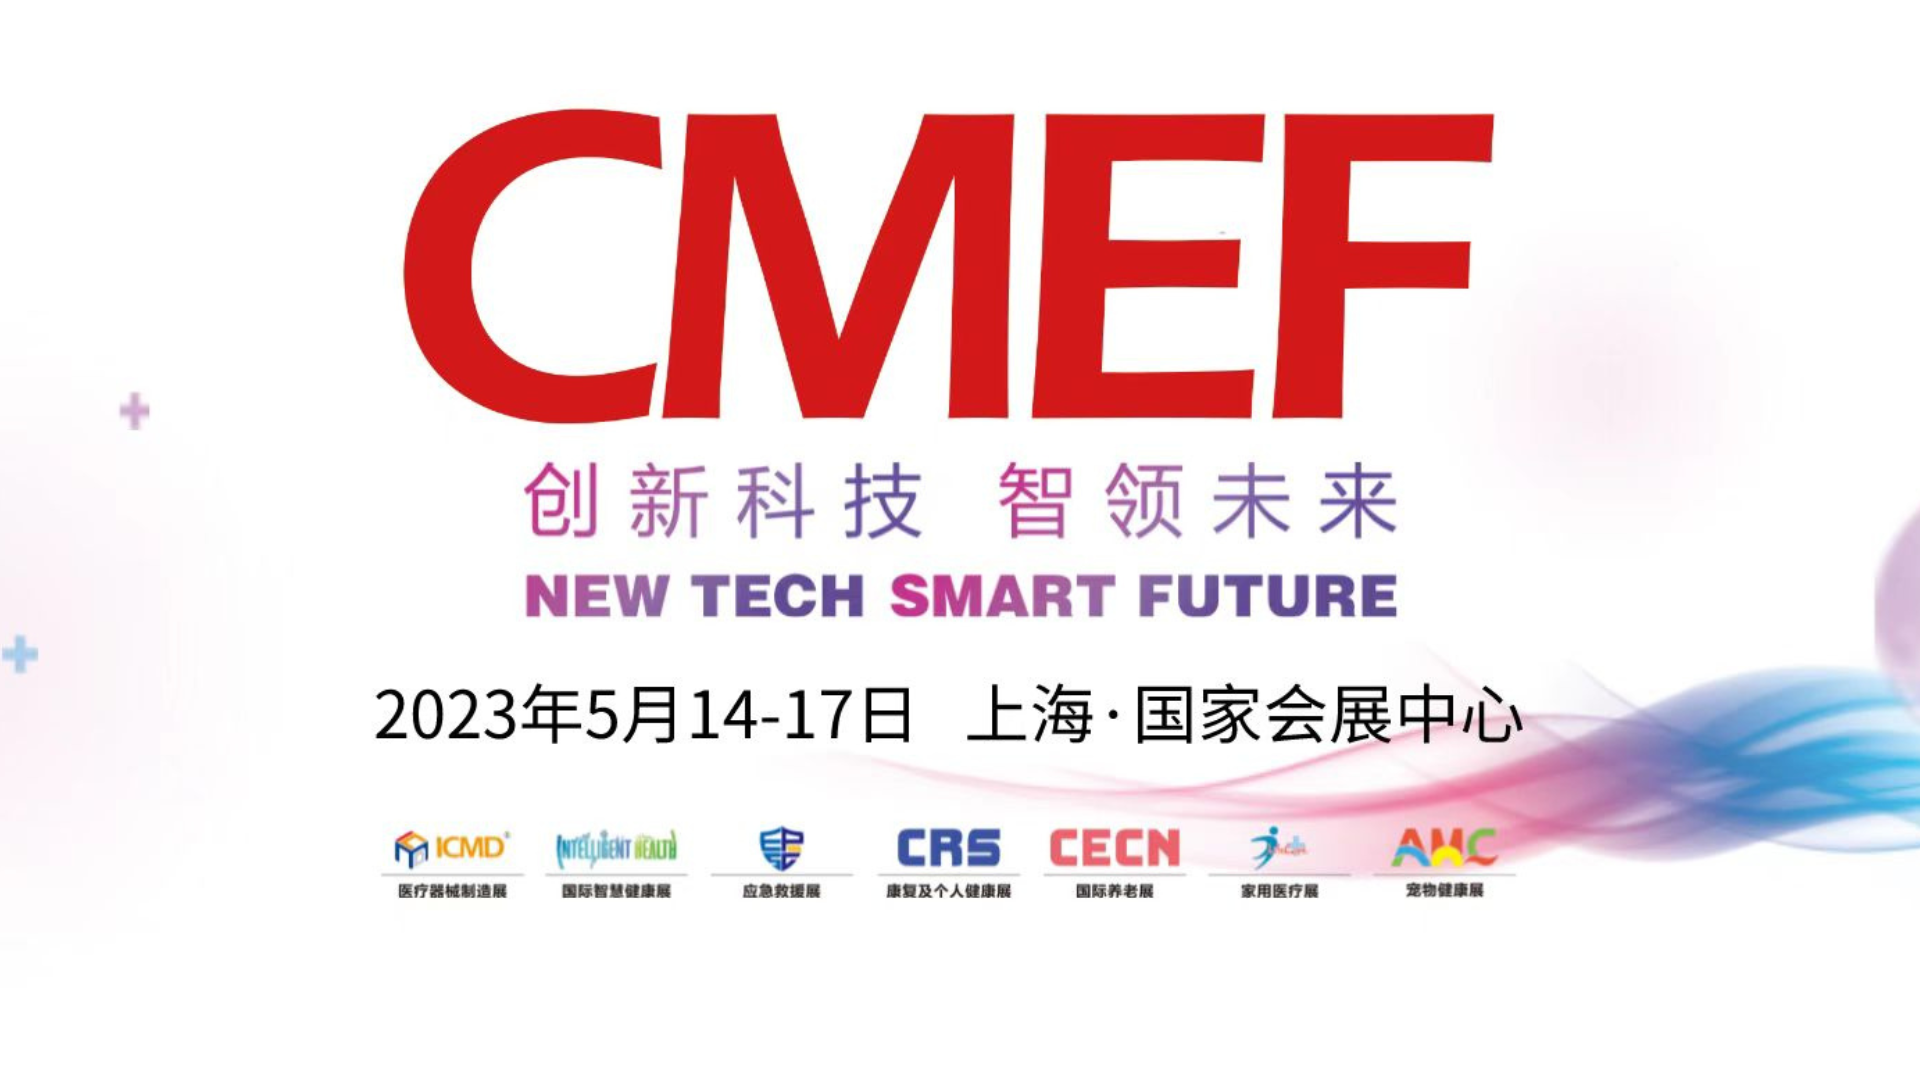 Visit us at the 87th CMEF 2023 Spring Shanghai